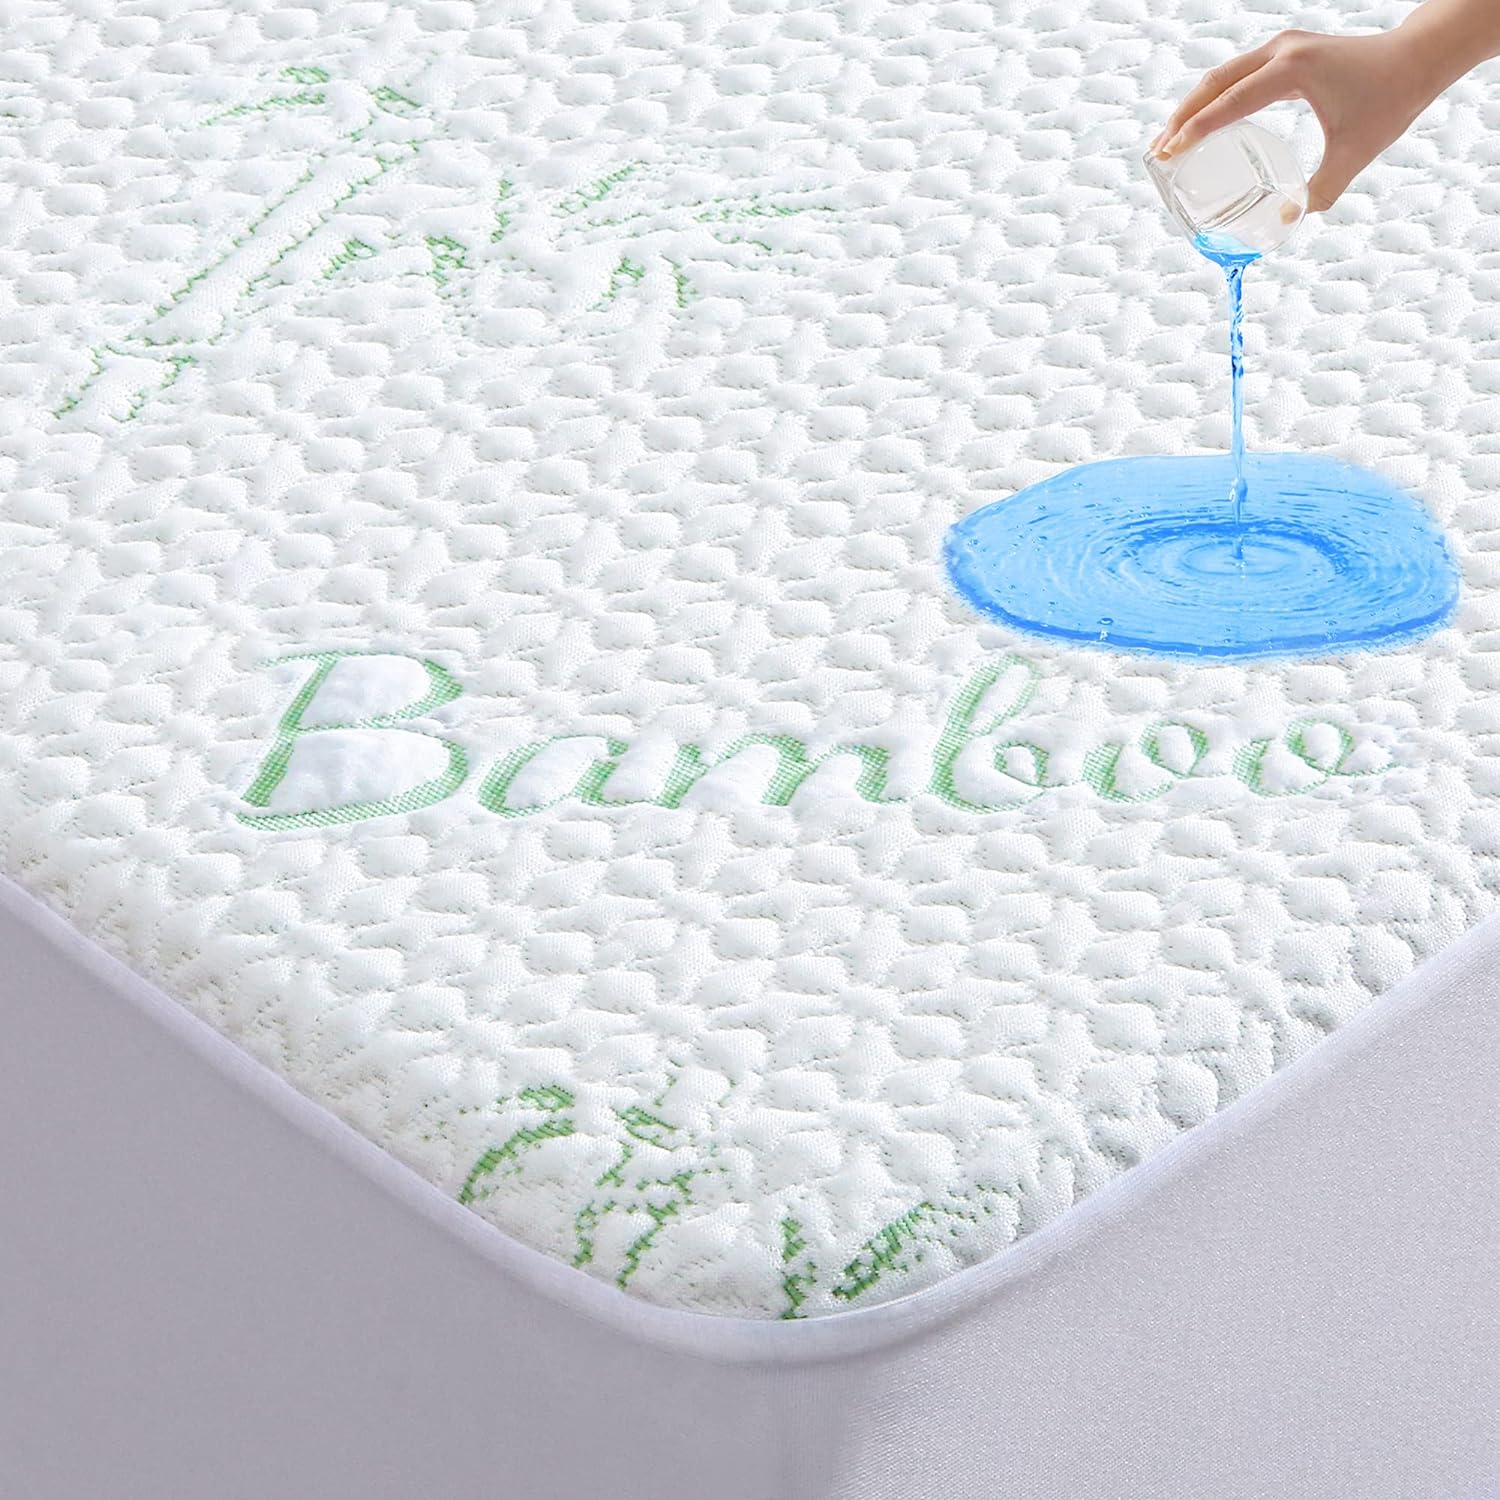 I bought this Bamboo Waterproof Queen Size Mattress Protector because I just bought a brand-new Queen-Size Mattress. This fits my mattress perfectly (no slipping off the mattress~stays snug). I wanted something Waterproof because I always have a bottle of water lying next to me in bed & I didn't want to take any chances of the water bottle leaking onto my Mattress & damaging it. This provides the Waterproof protection I was looking for & it DOESN'T make any weird noises when you move around like